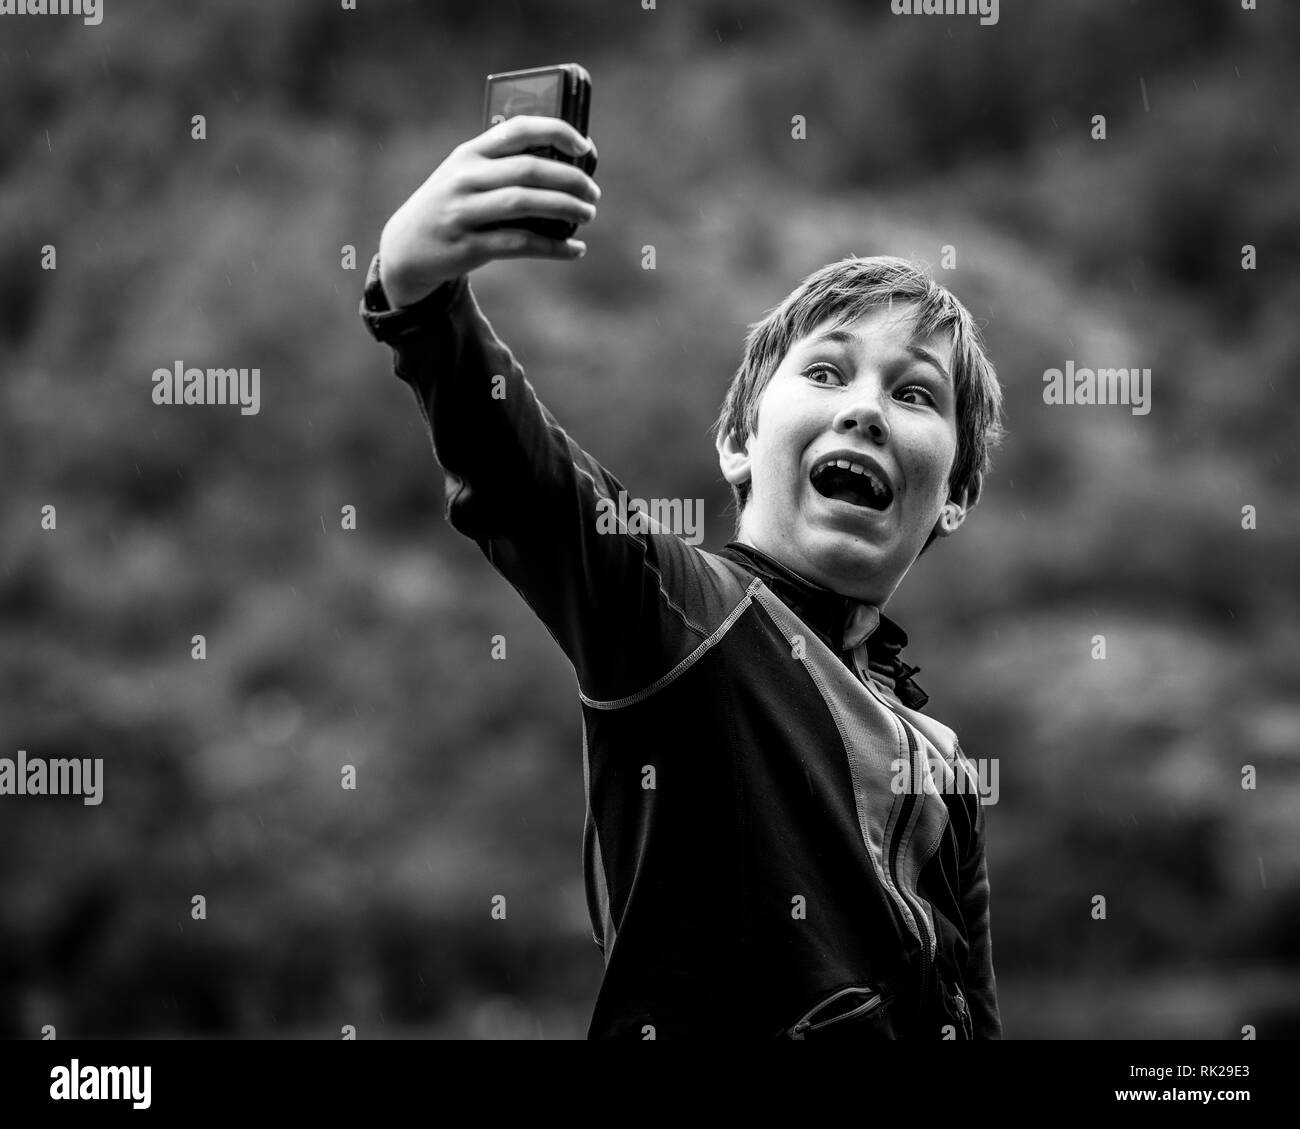 Candid portrait of young boy taking selfie outdoors using smart phone, black and white image Stock Photo